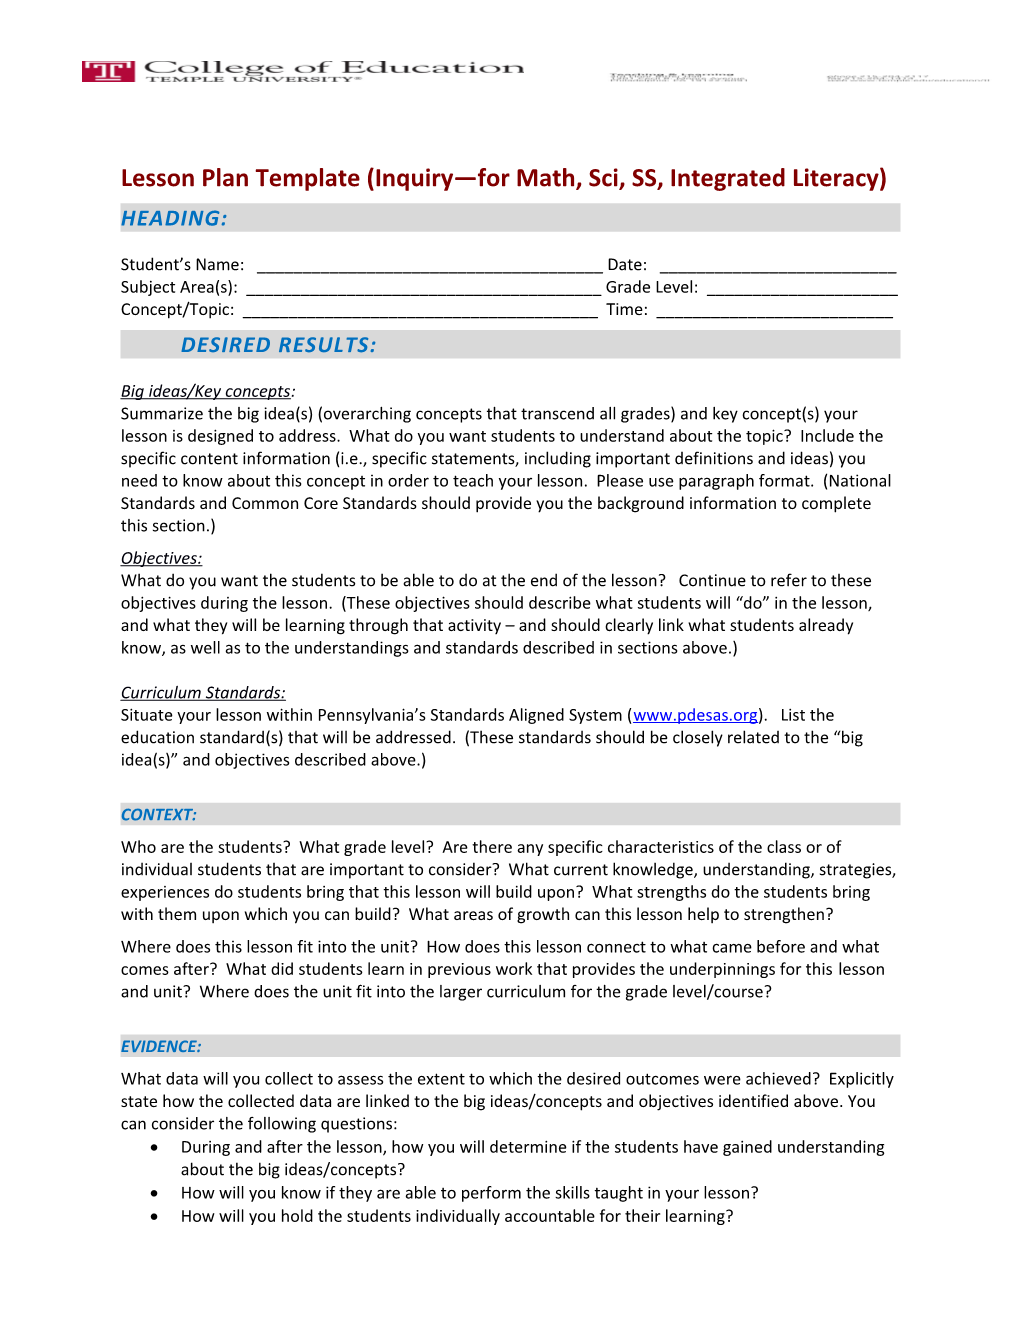 Lesson Plan Template (Inquiry for Math, Sci, SS, Integrated Literacy)